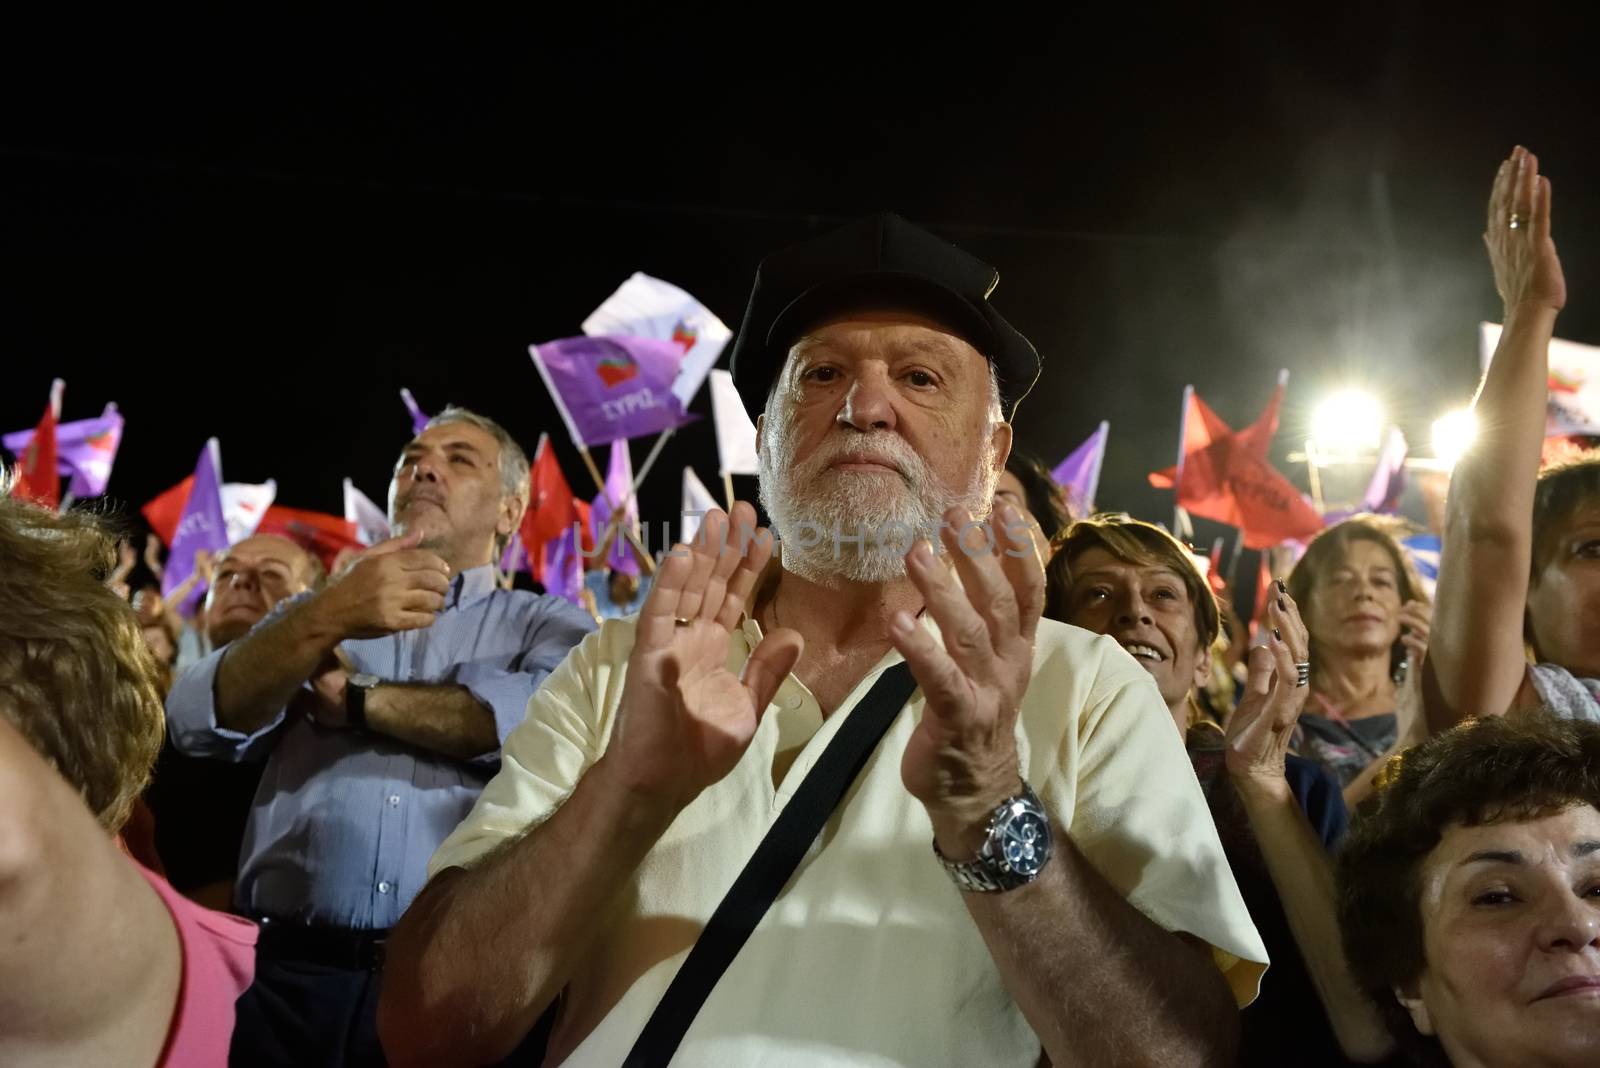 GREECE, Athens: A supporter of the Syriza party applauds during the party's main election campaign rally in Athens, Greece on September 18, 2015. The Greek General Election will be held on September 20